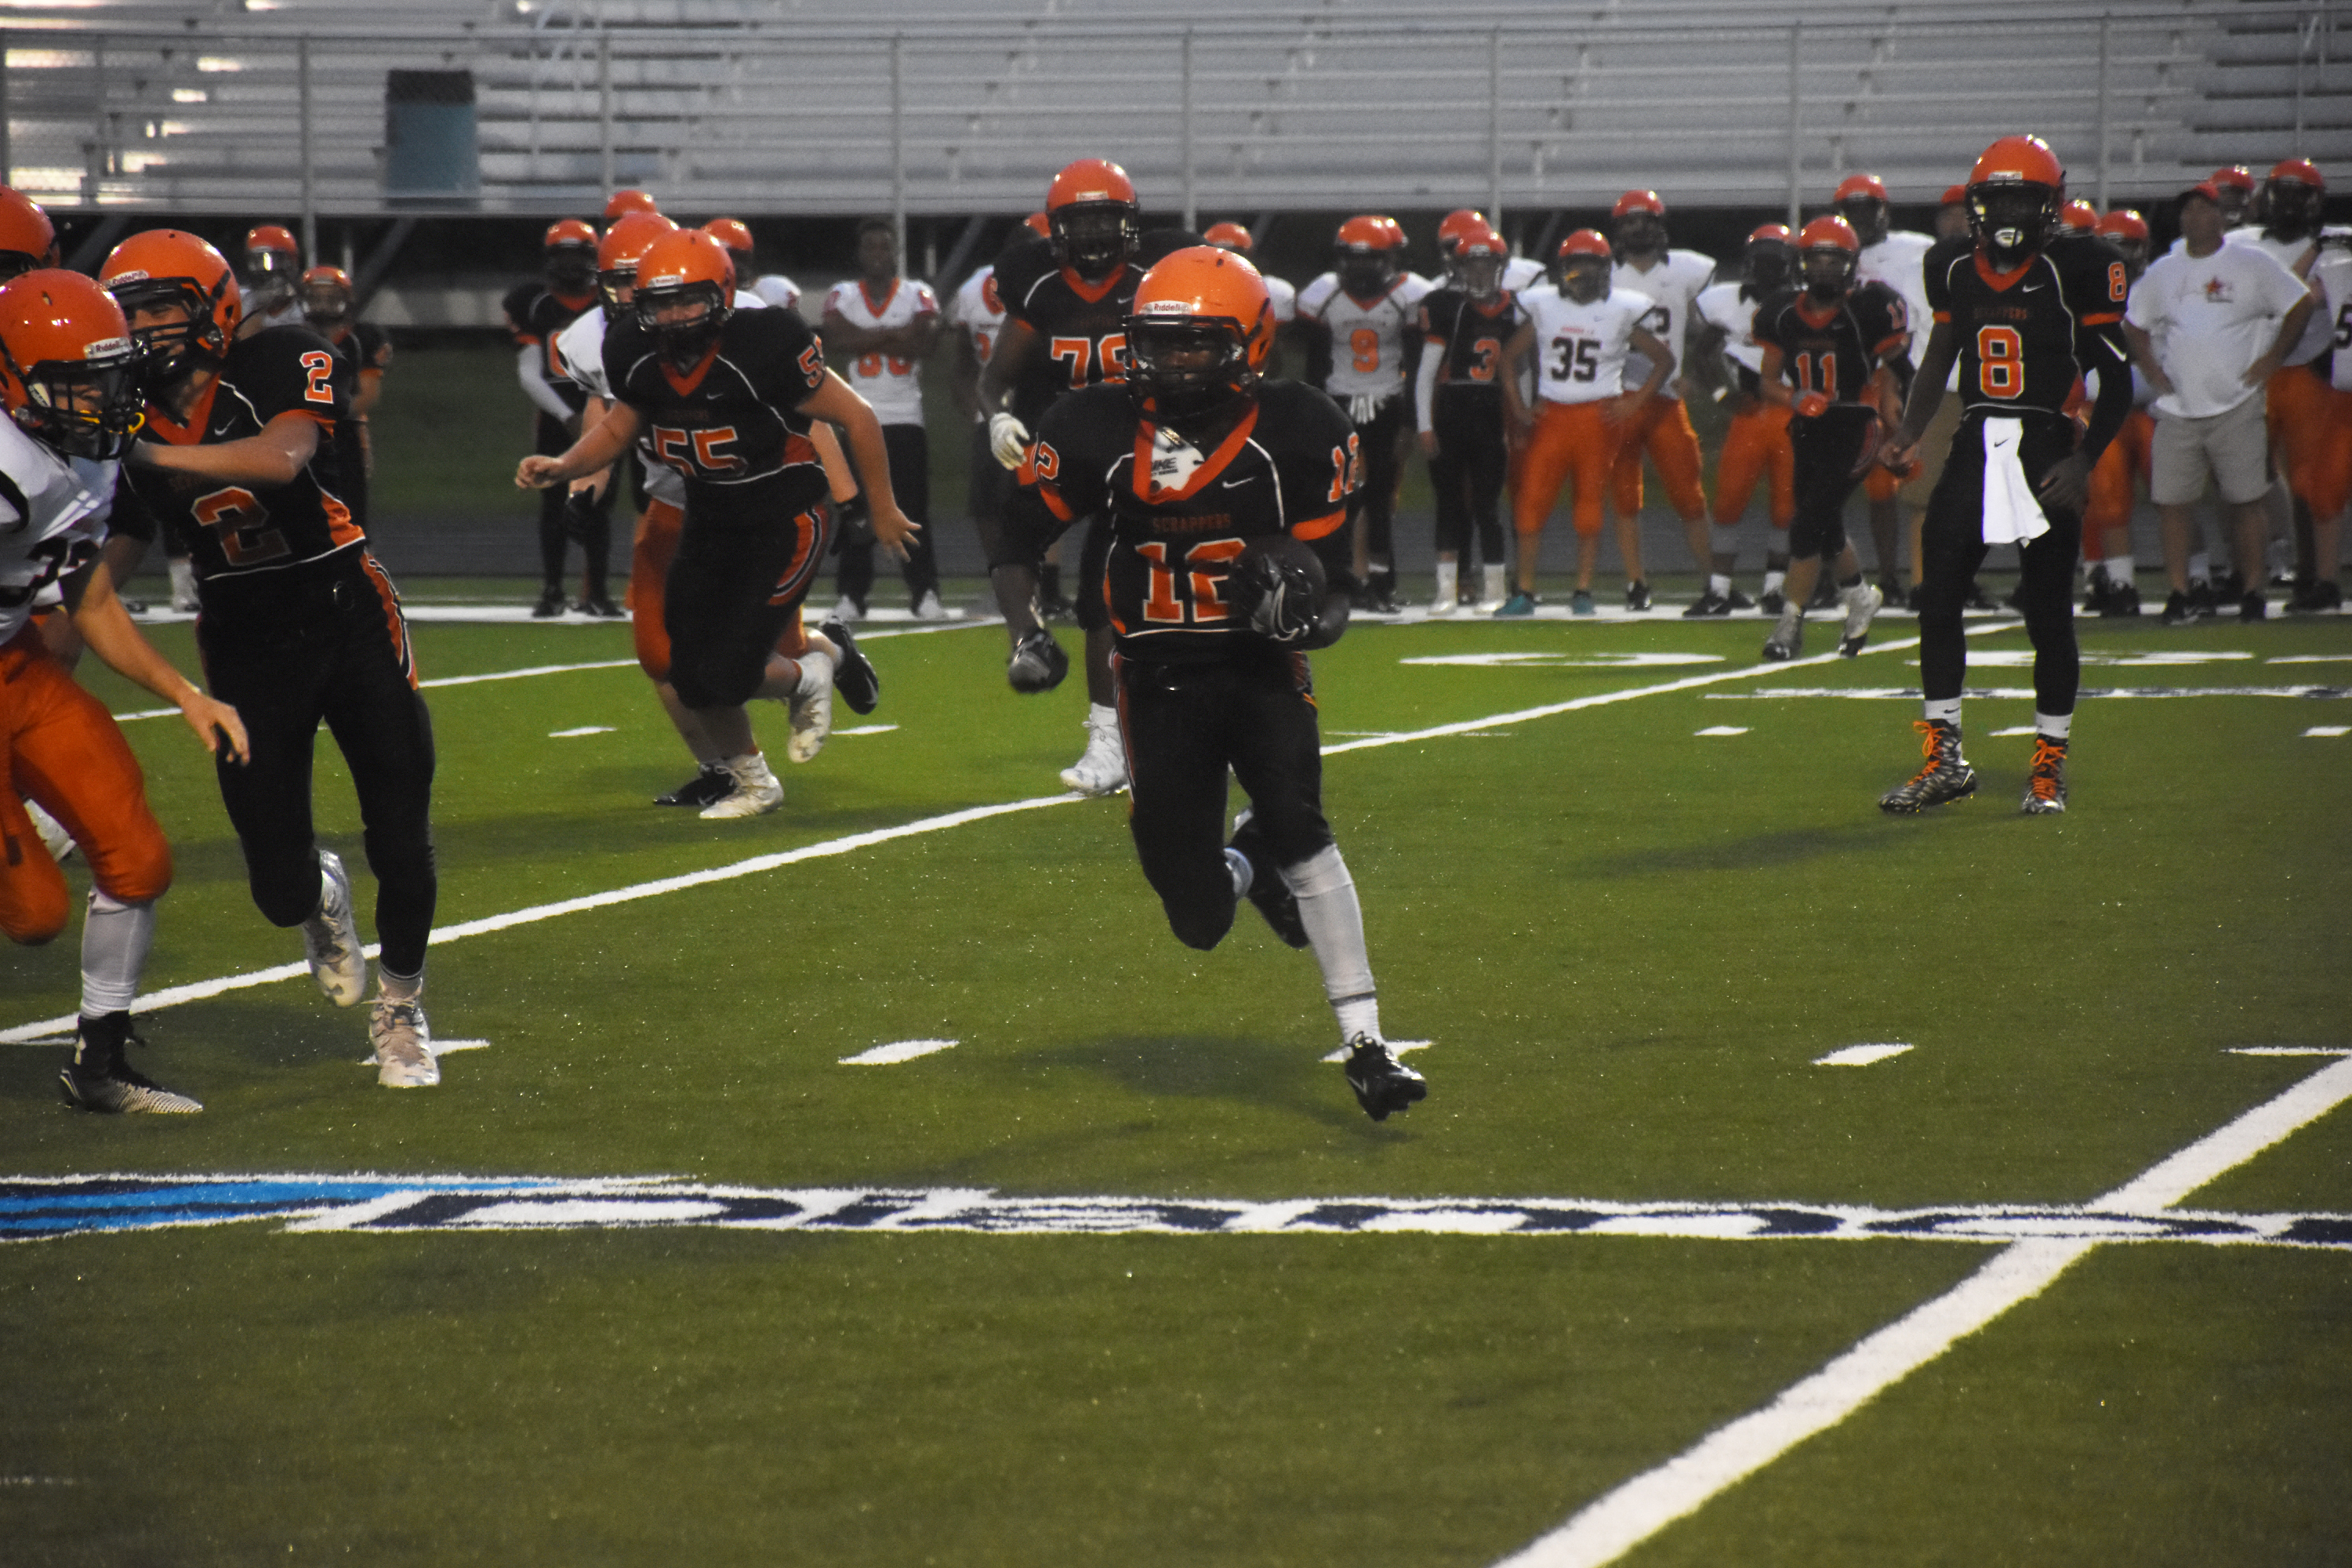 Carmillias Morrison (12) carries the ball for the junior Scrappers in their scrimmage against the sophomore Scrappers Aug. 19. Morrison is expected to see extensive duty at running back for the juniors. Their season will open Sept. 8 at Magnolia. The first home game will be Sept. 15 against Hope.